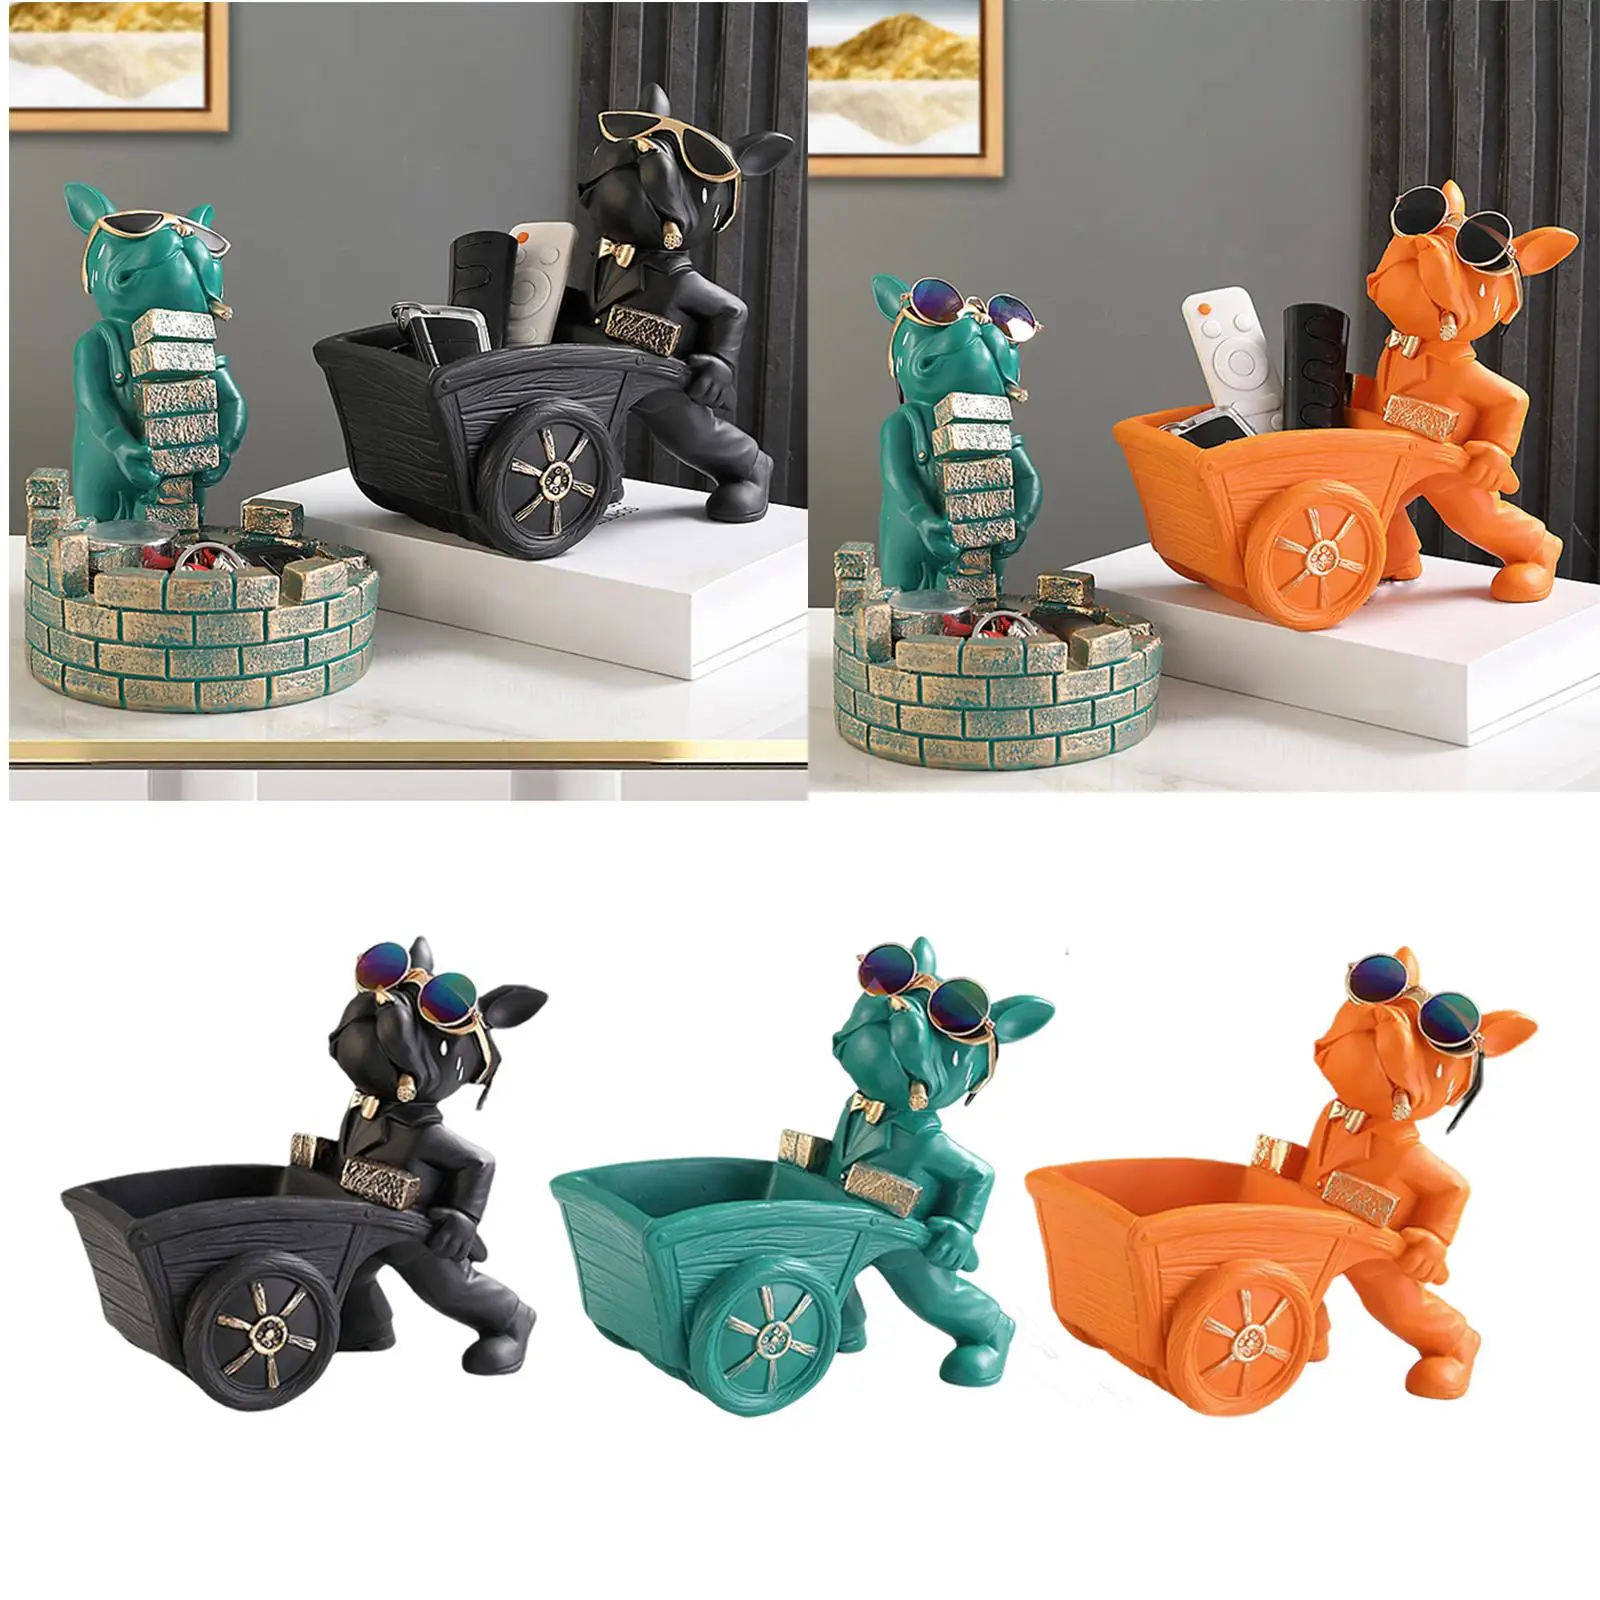 Dog Sculpture with Serving Tray Abstract Animal Figurines for TV Cabinet